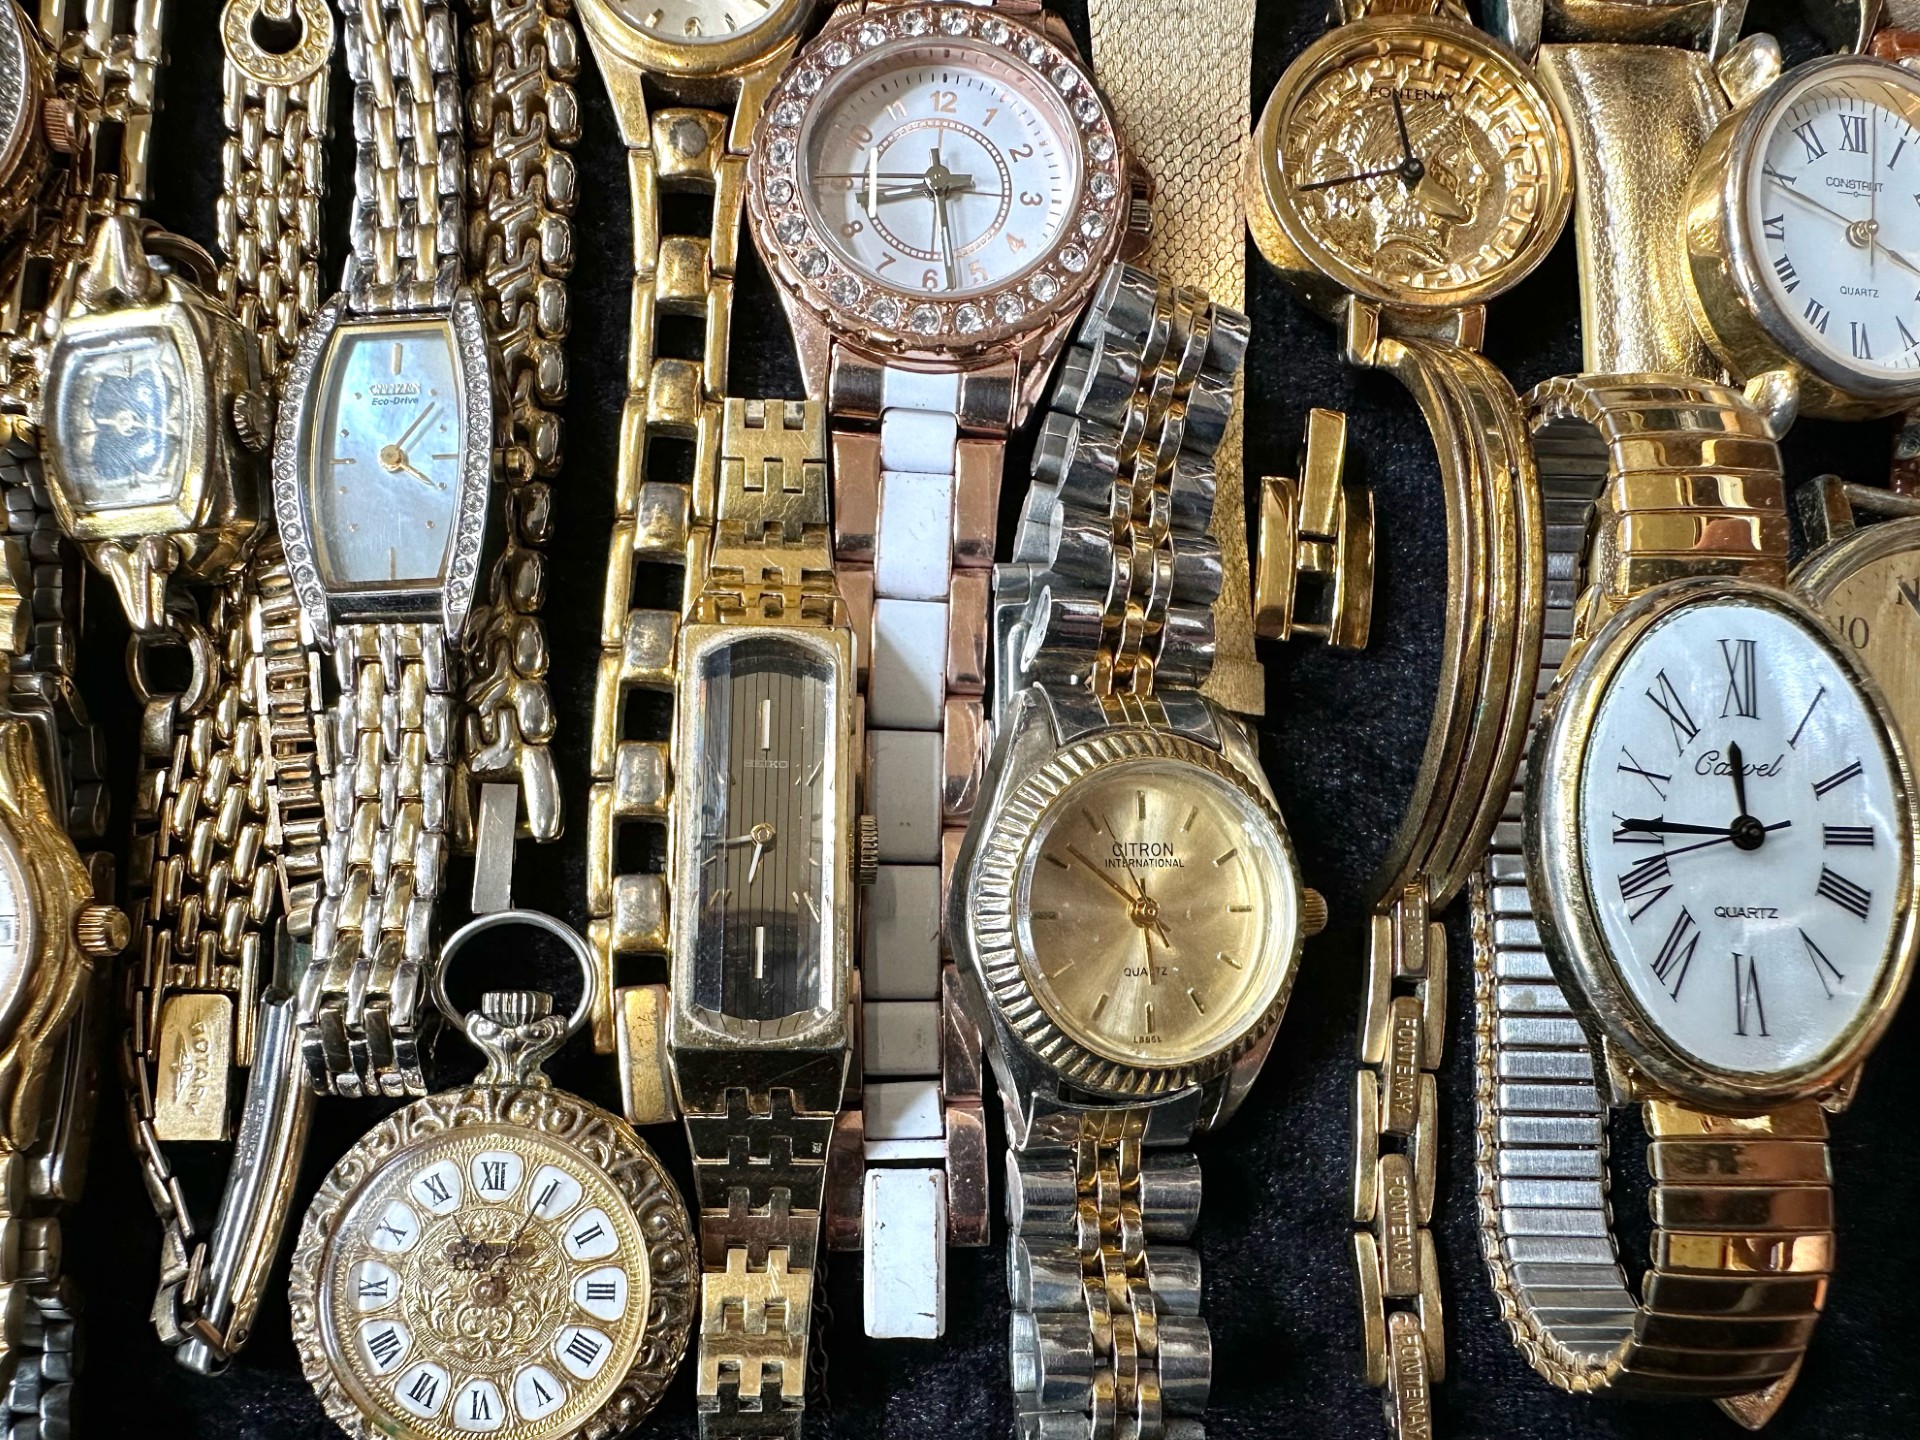 Collection of Ladies & Gentlemen's Wristwatches, leather and bracelet straps, various makes - Image 2 of 3